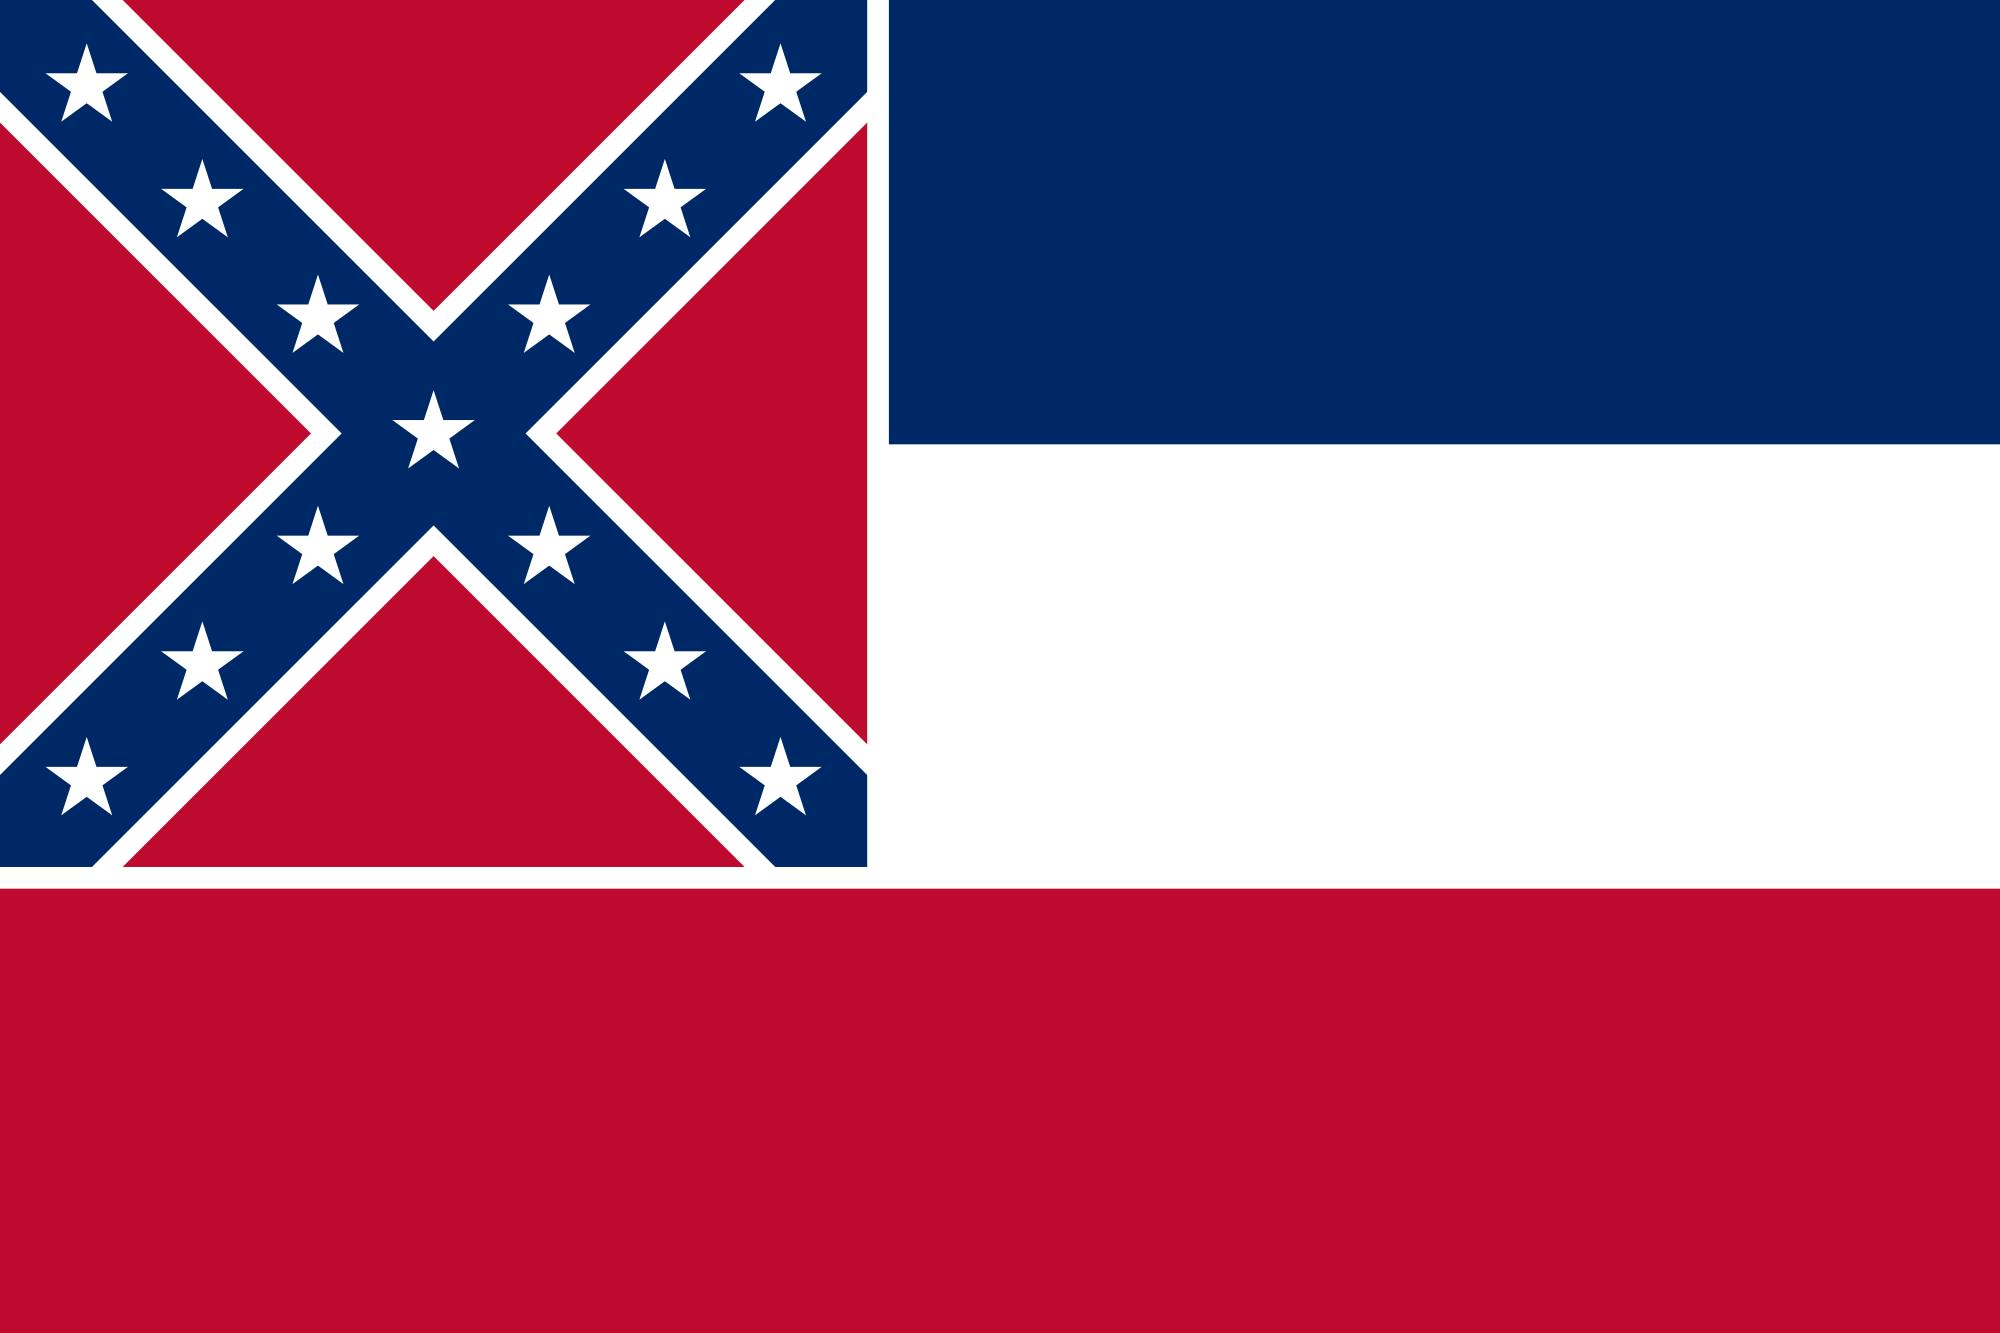 The current Mississippi state flag, adopted in 1894.